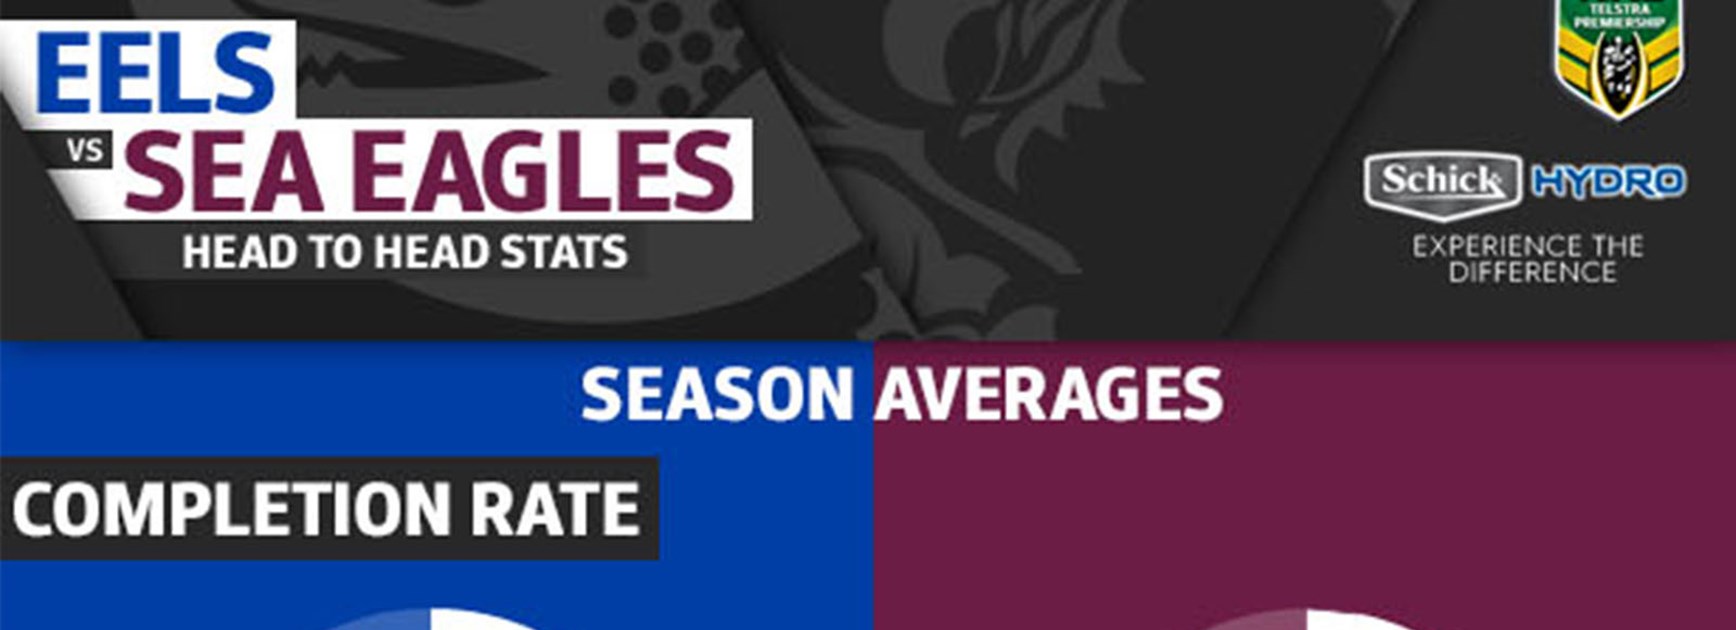 All the stats that matter as the Eels host the Sea Eagles on Friday night.